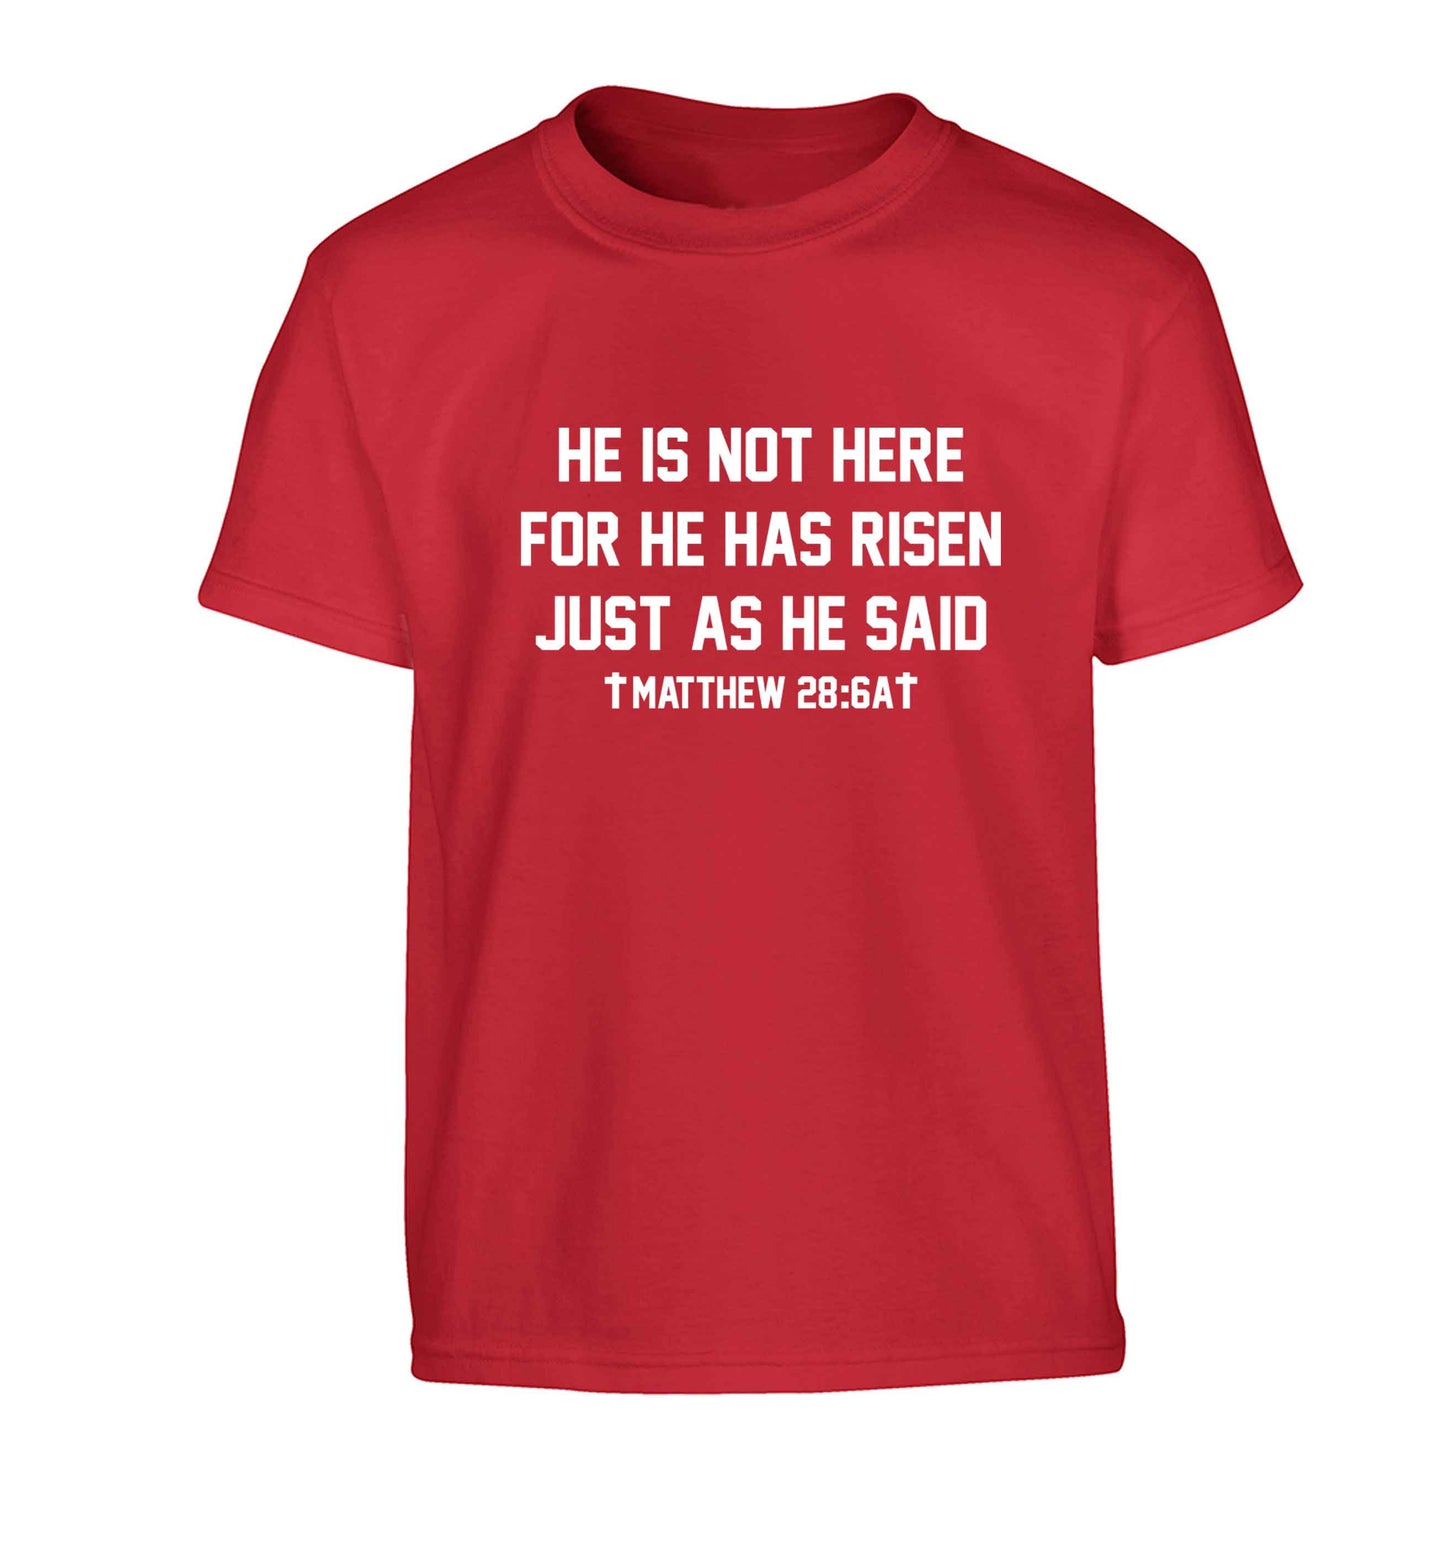 He is not here for he has risen just as he said matthew 28:6A Children's red Tshirt 12-13 Years